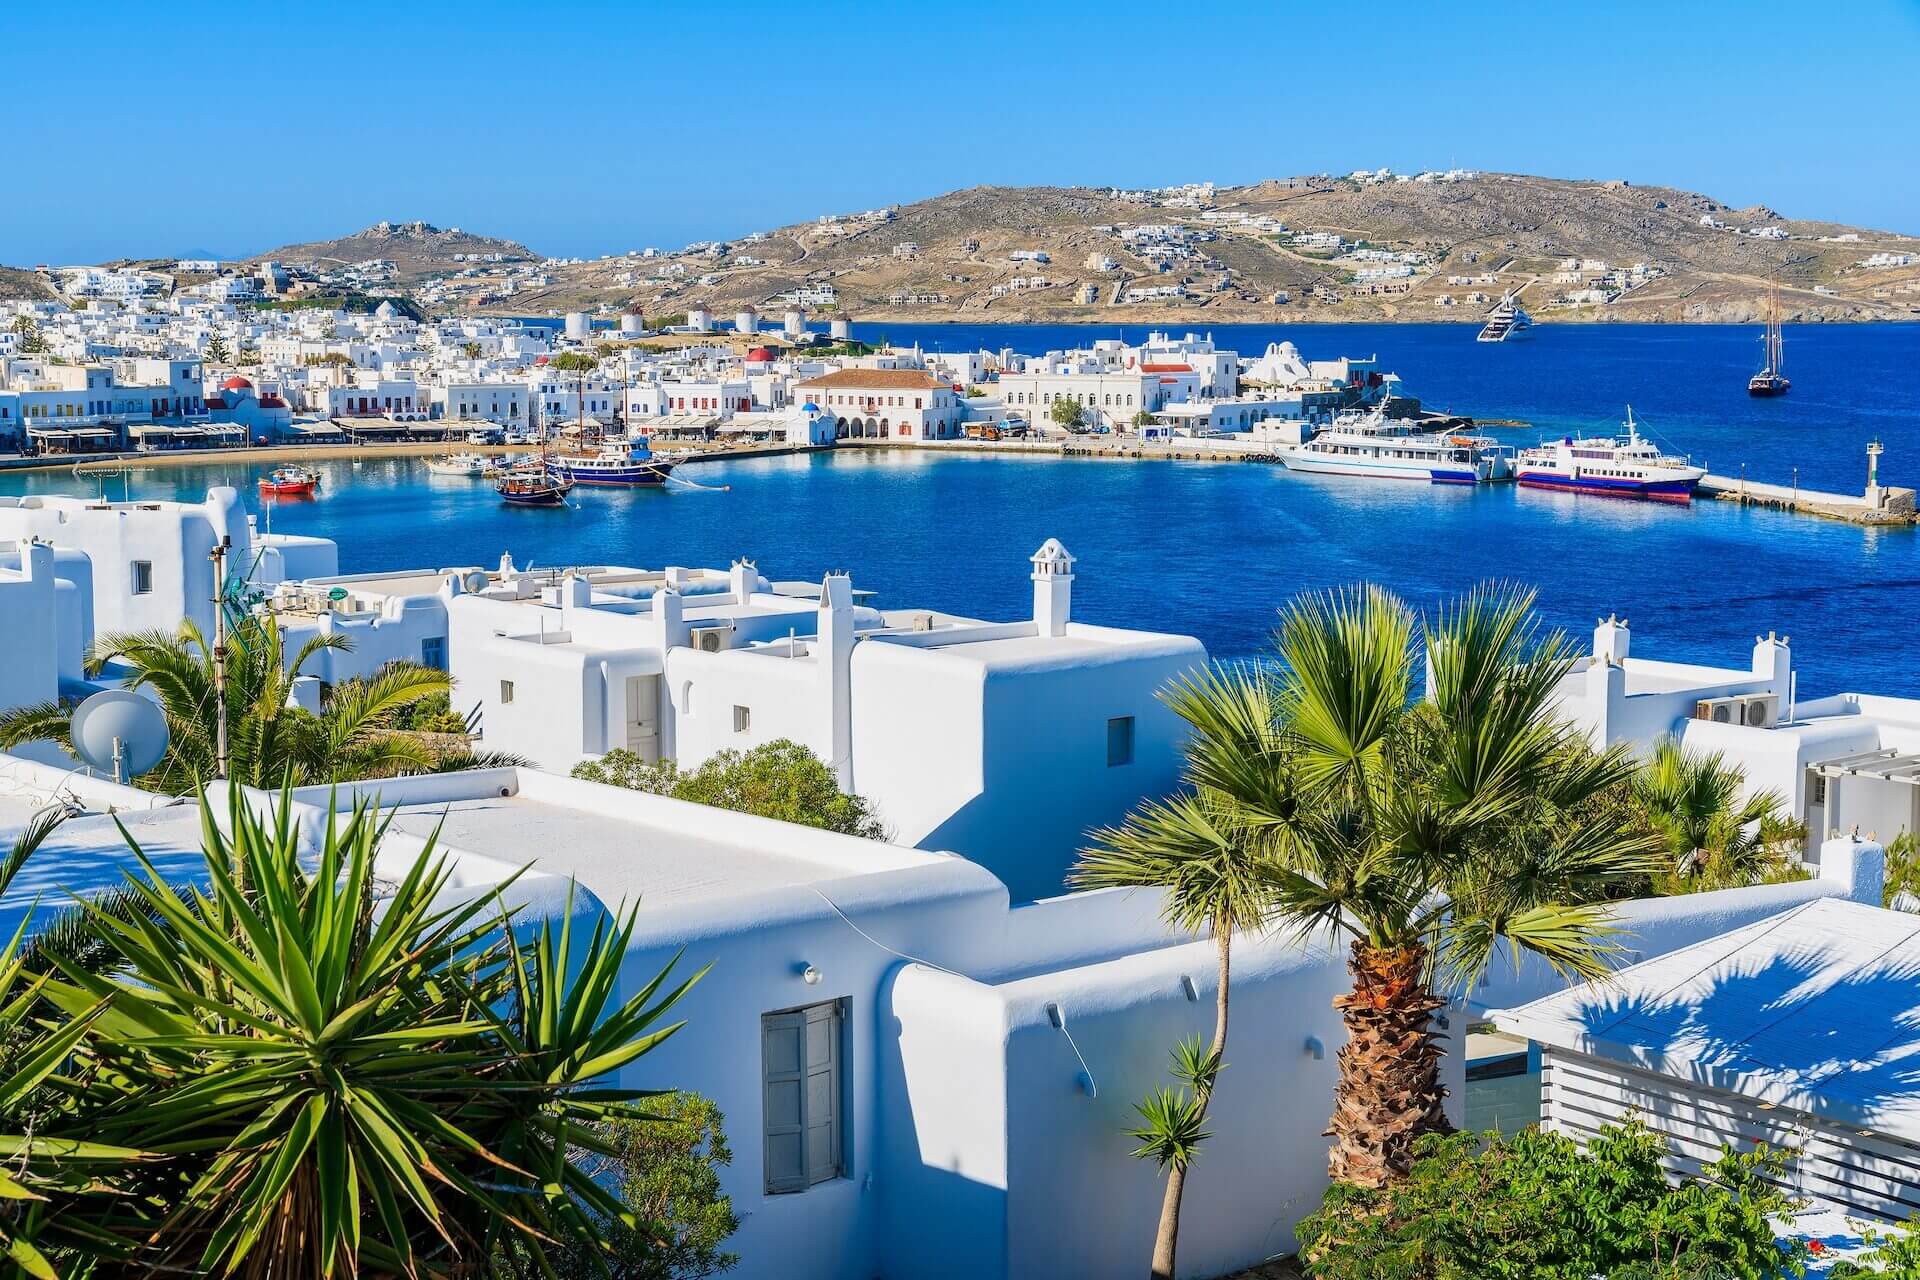 The view of the coast of Mykonos